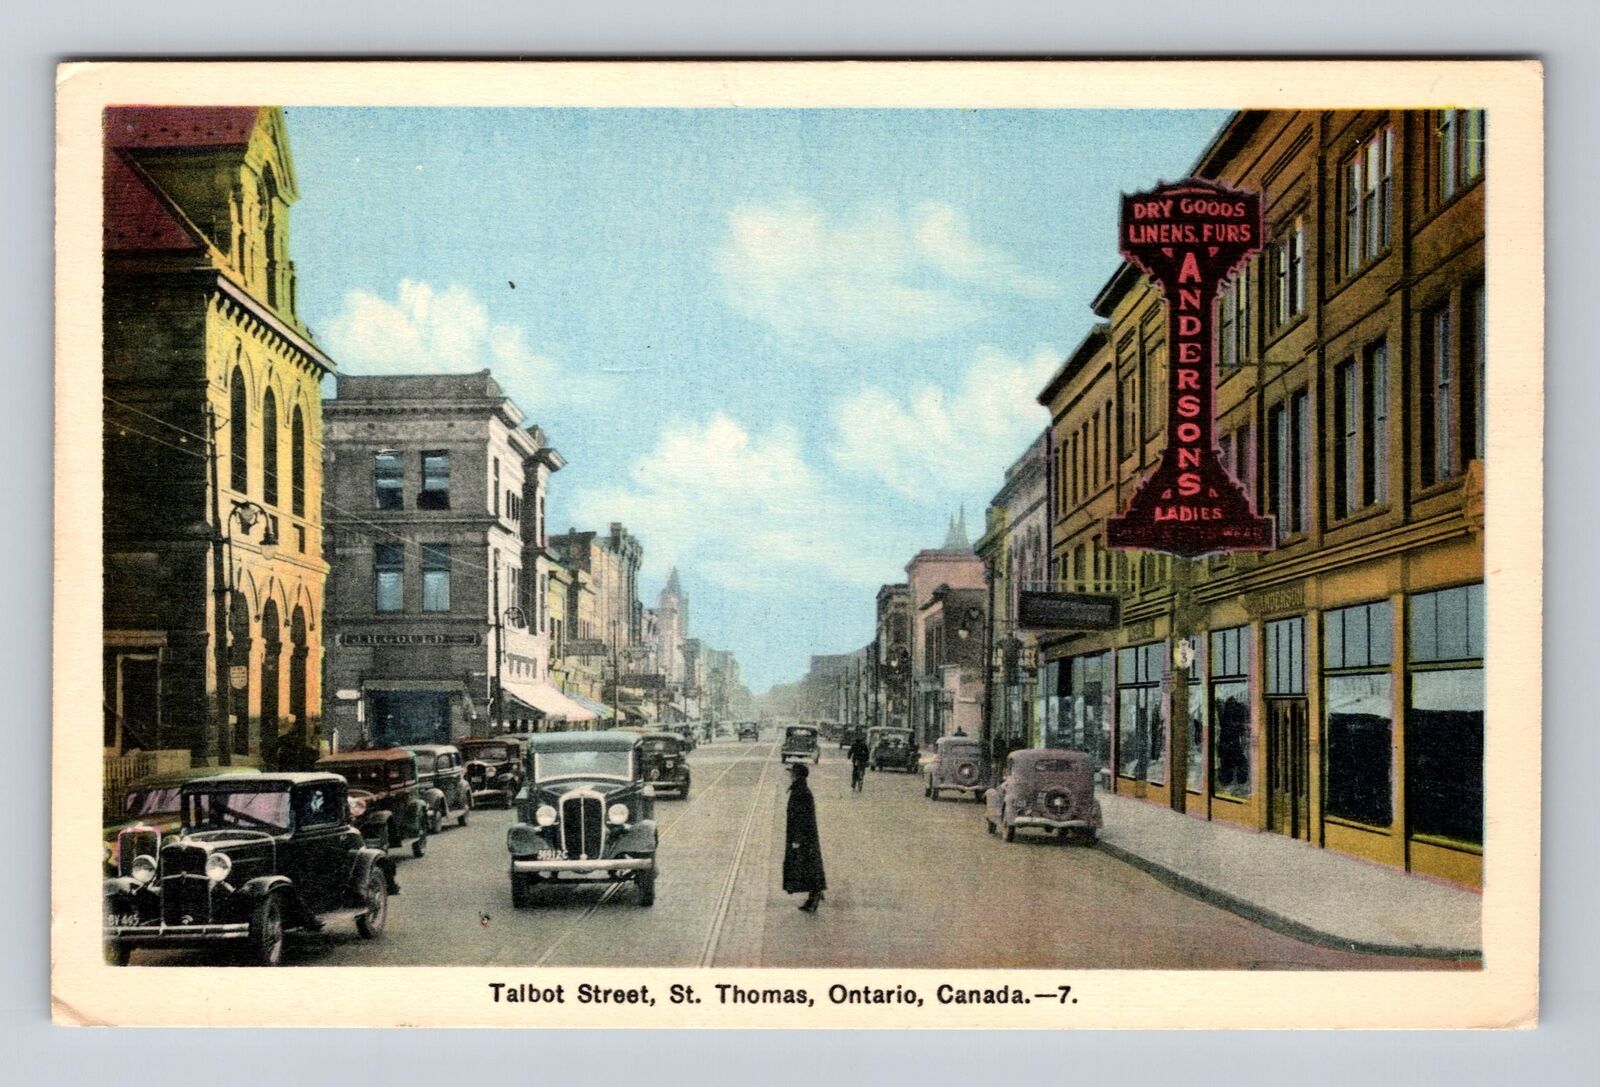 St. Thomas Canada, Talbot Street Anderson\'s Dry Goods 40\'s Cars Vintage Postcard